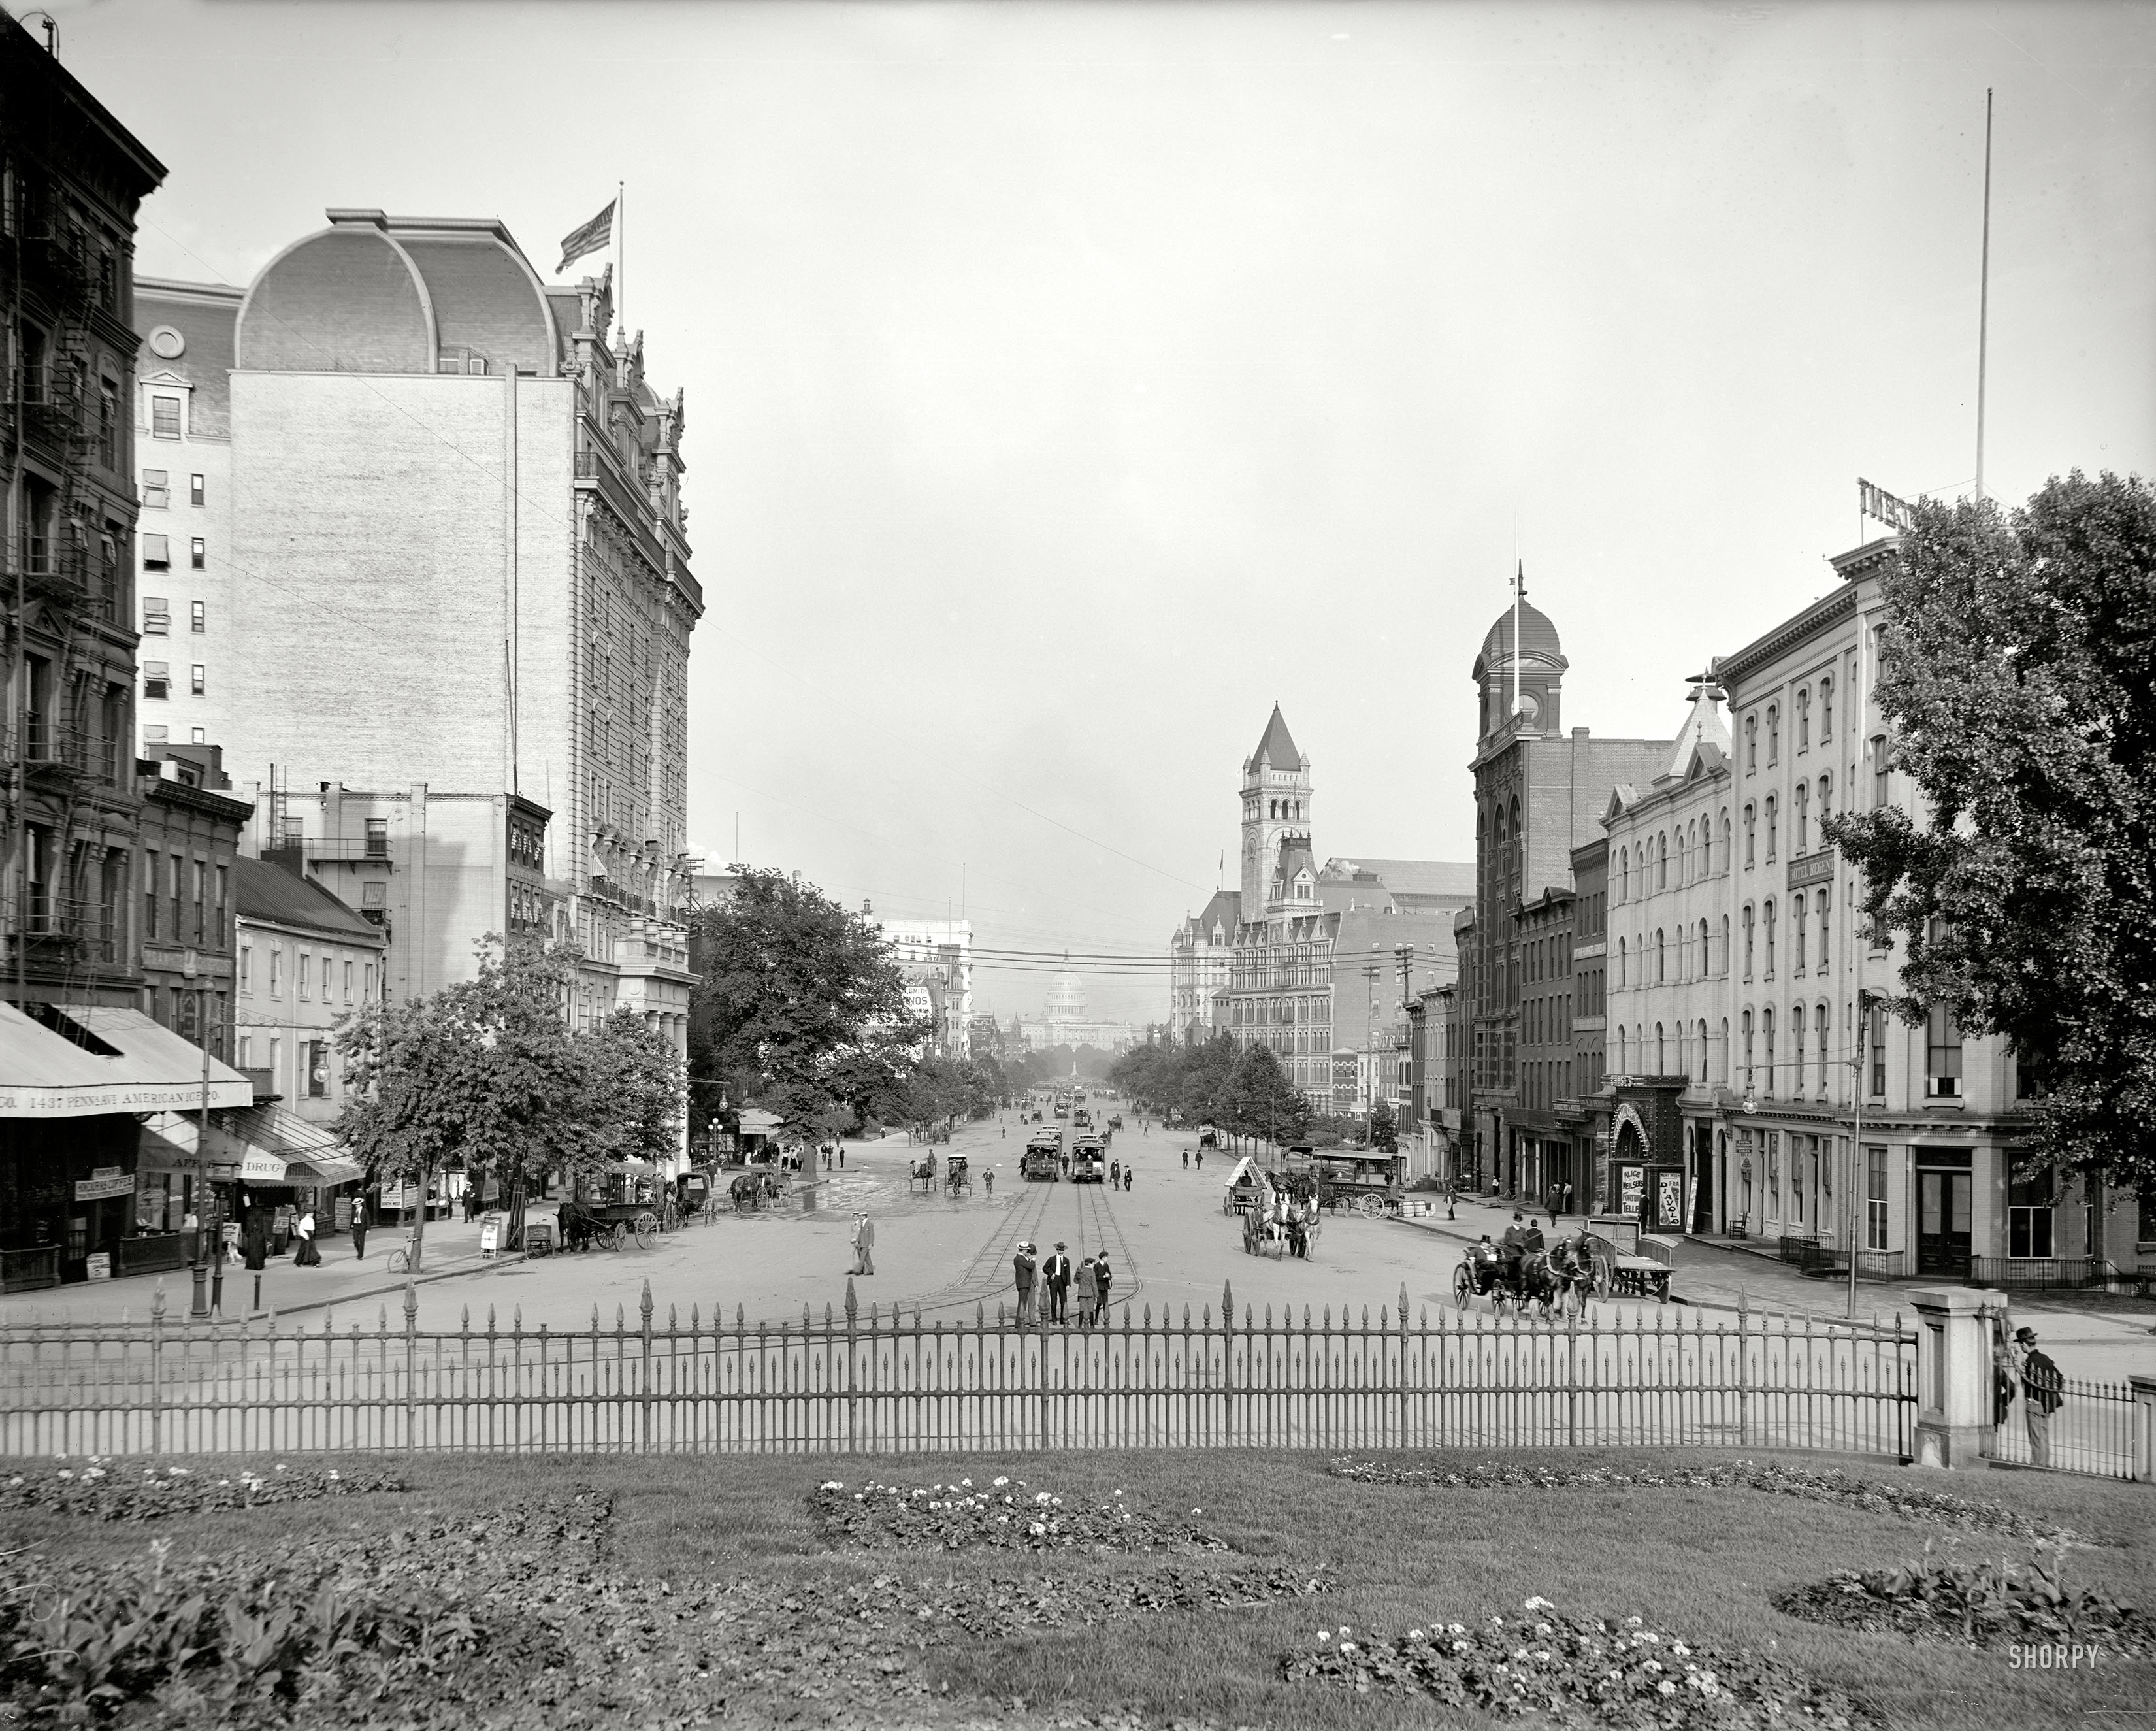 June 1903. "Pennsylvania Avenue -- Washington, D.C." Landmarks here include the Old Post Office and that big domed building at the end of the street. 8x10 inch dry plate glass negative, Detroit Publishing Company. View full size.